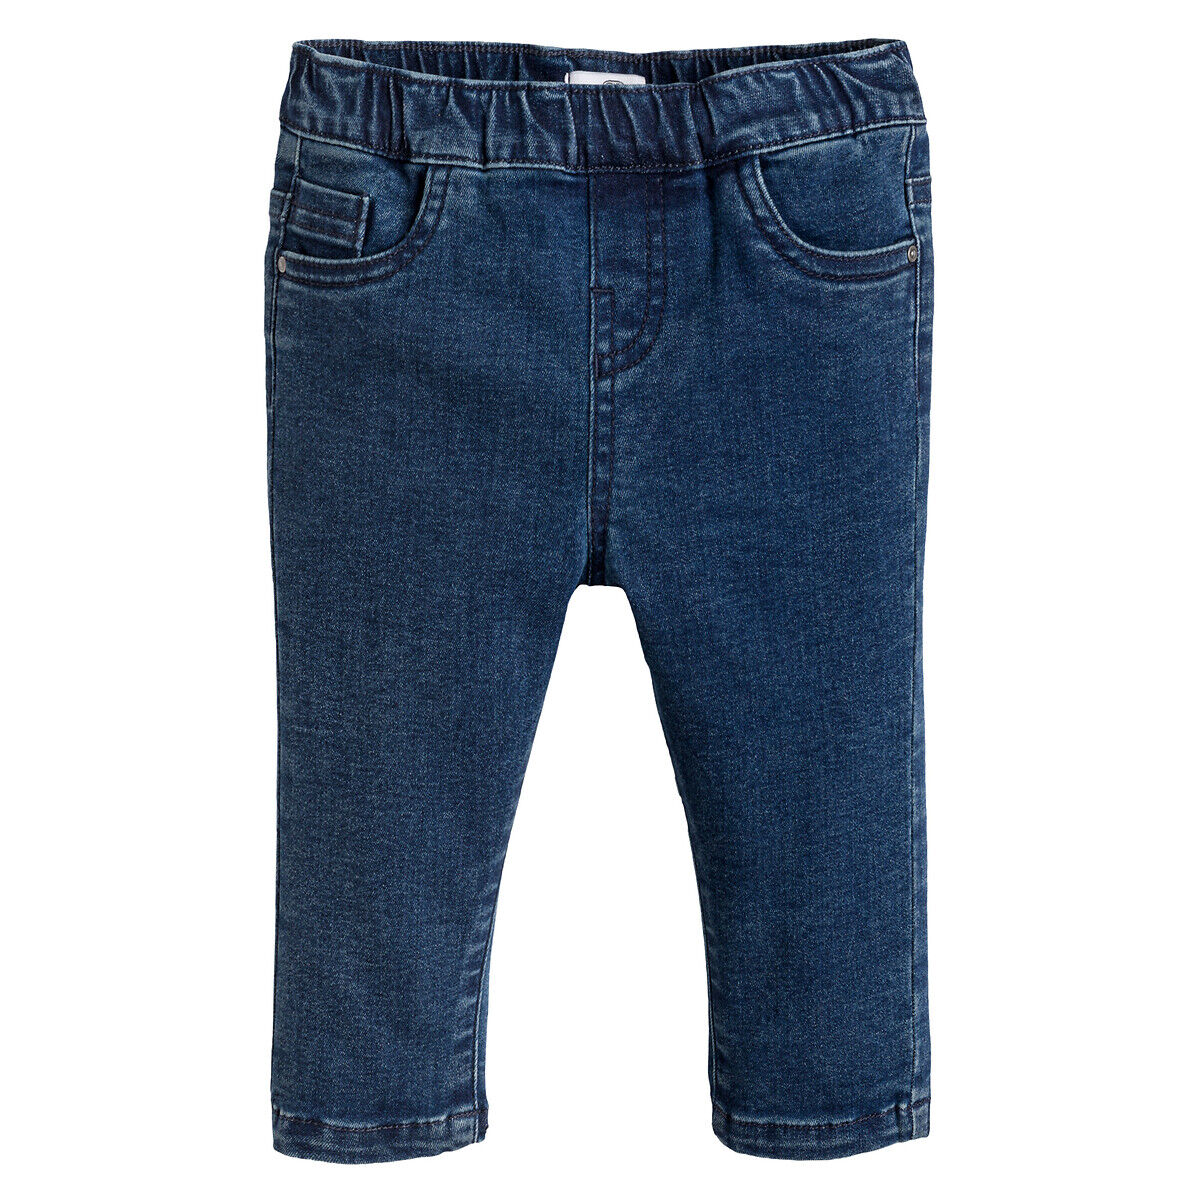 La Redoute Collections Jeans slim 3 meses-3 anos   ganga